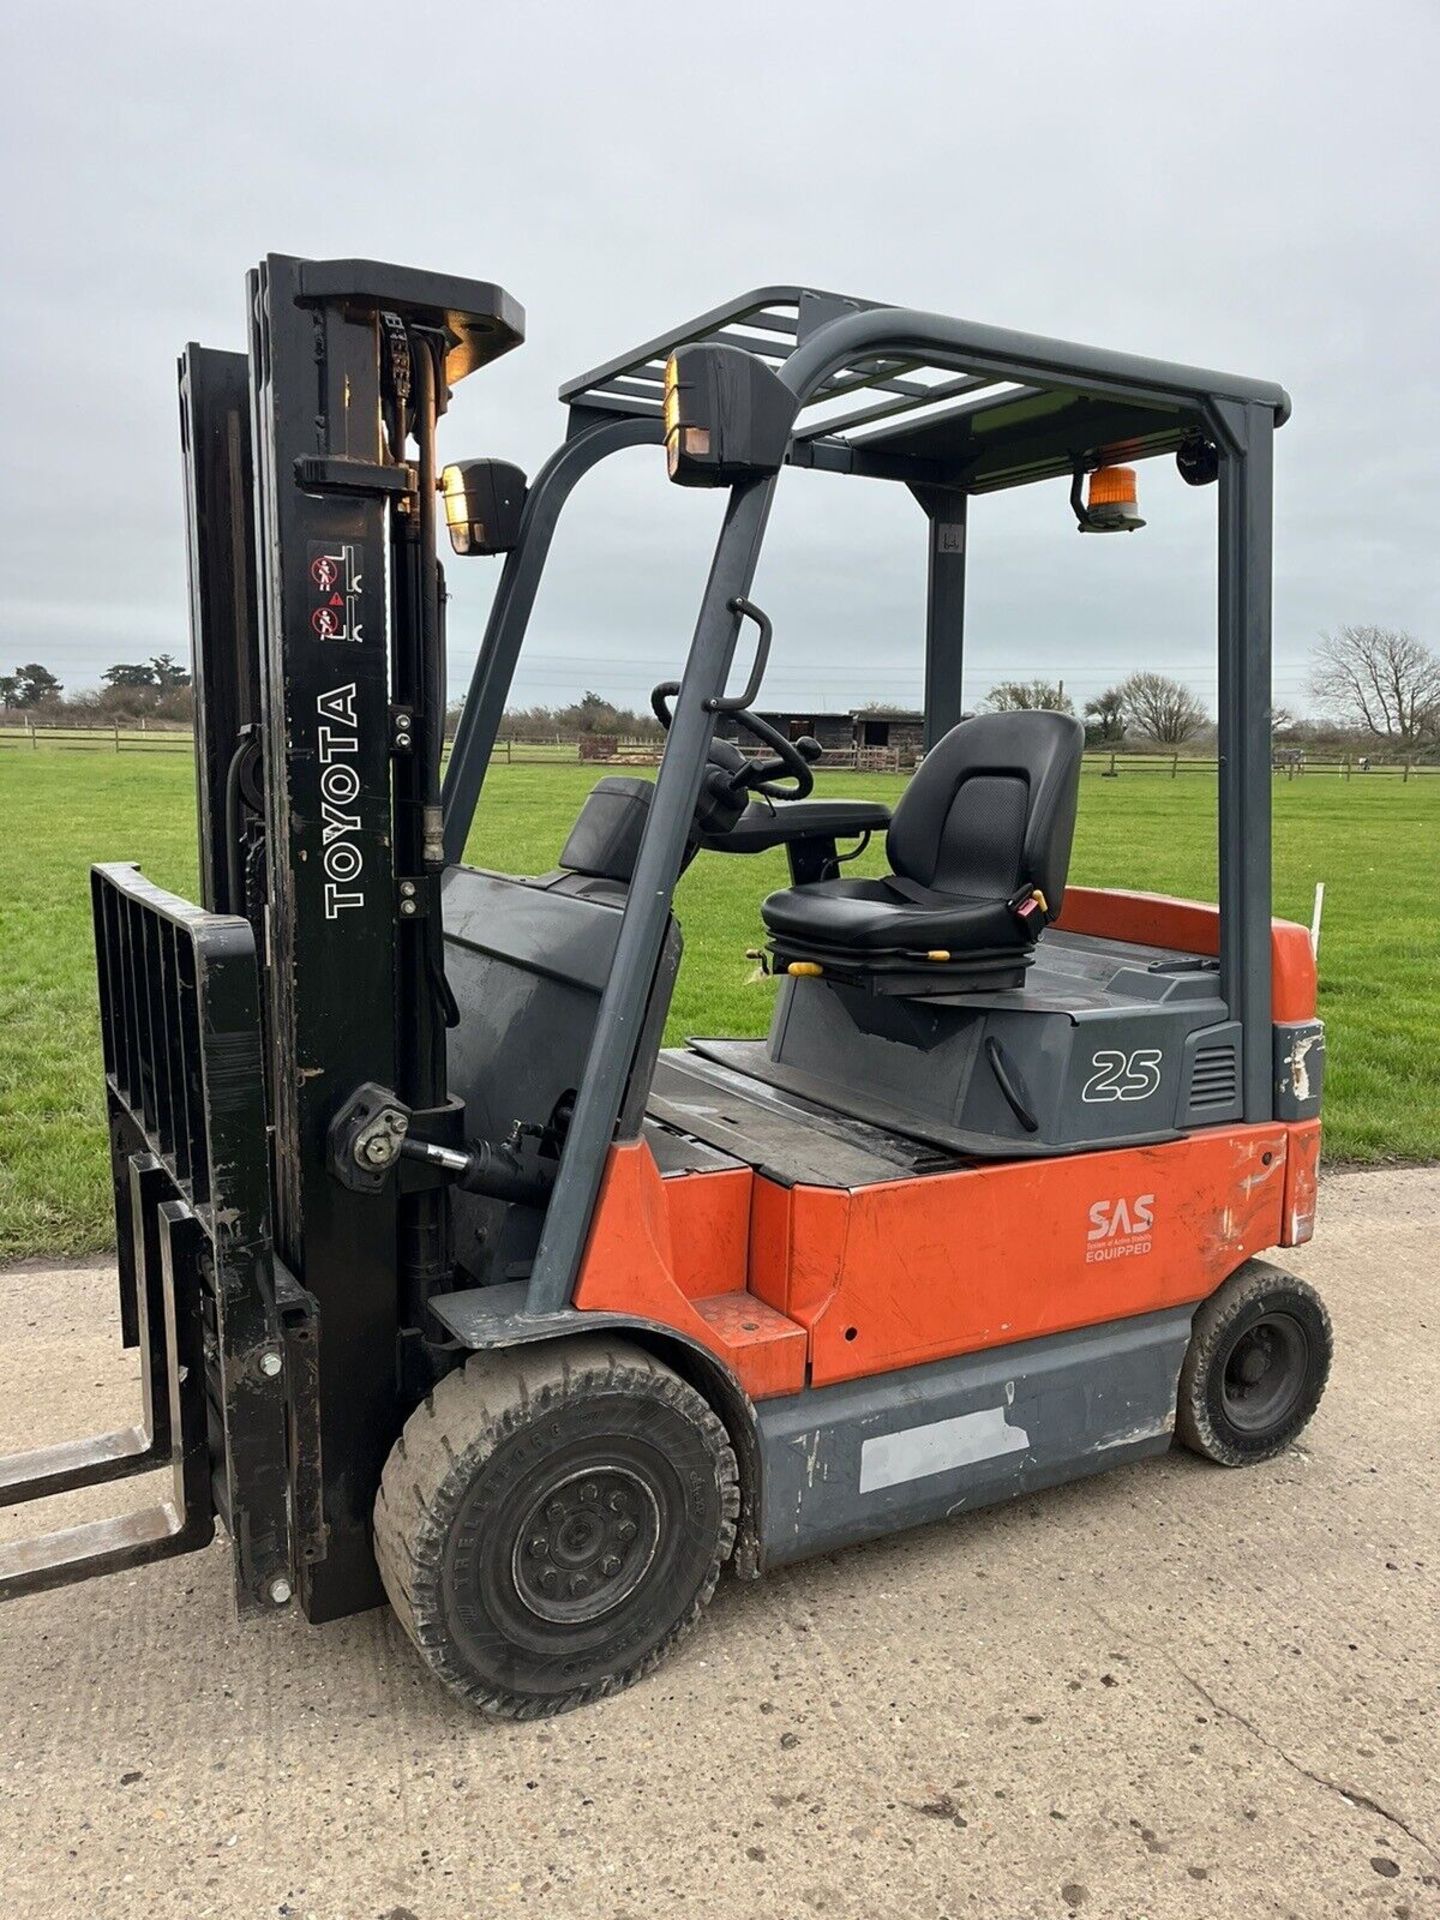 TOYOTA 2.5 Tonne (Container Spec) Electric Forklift Truck